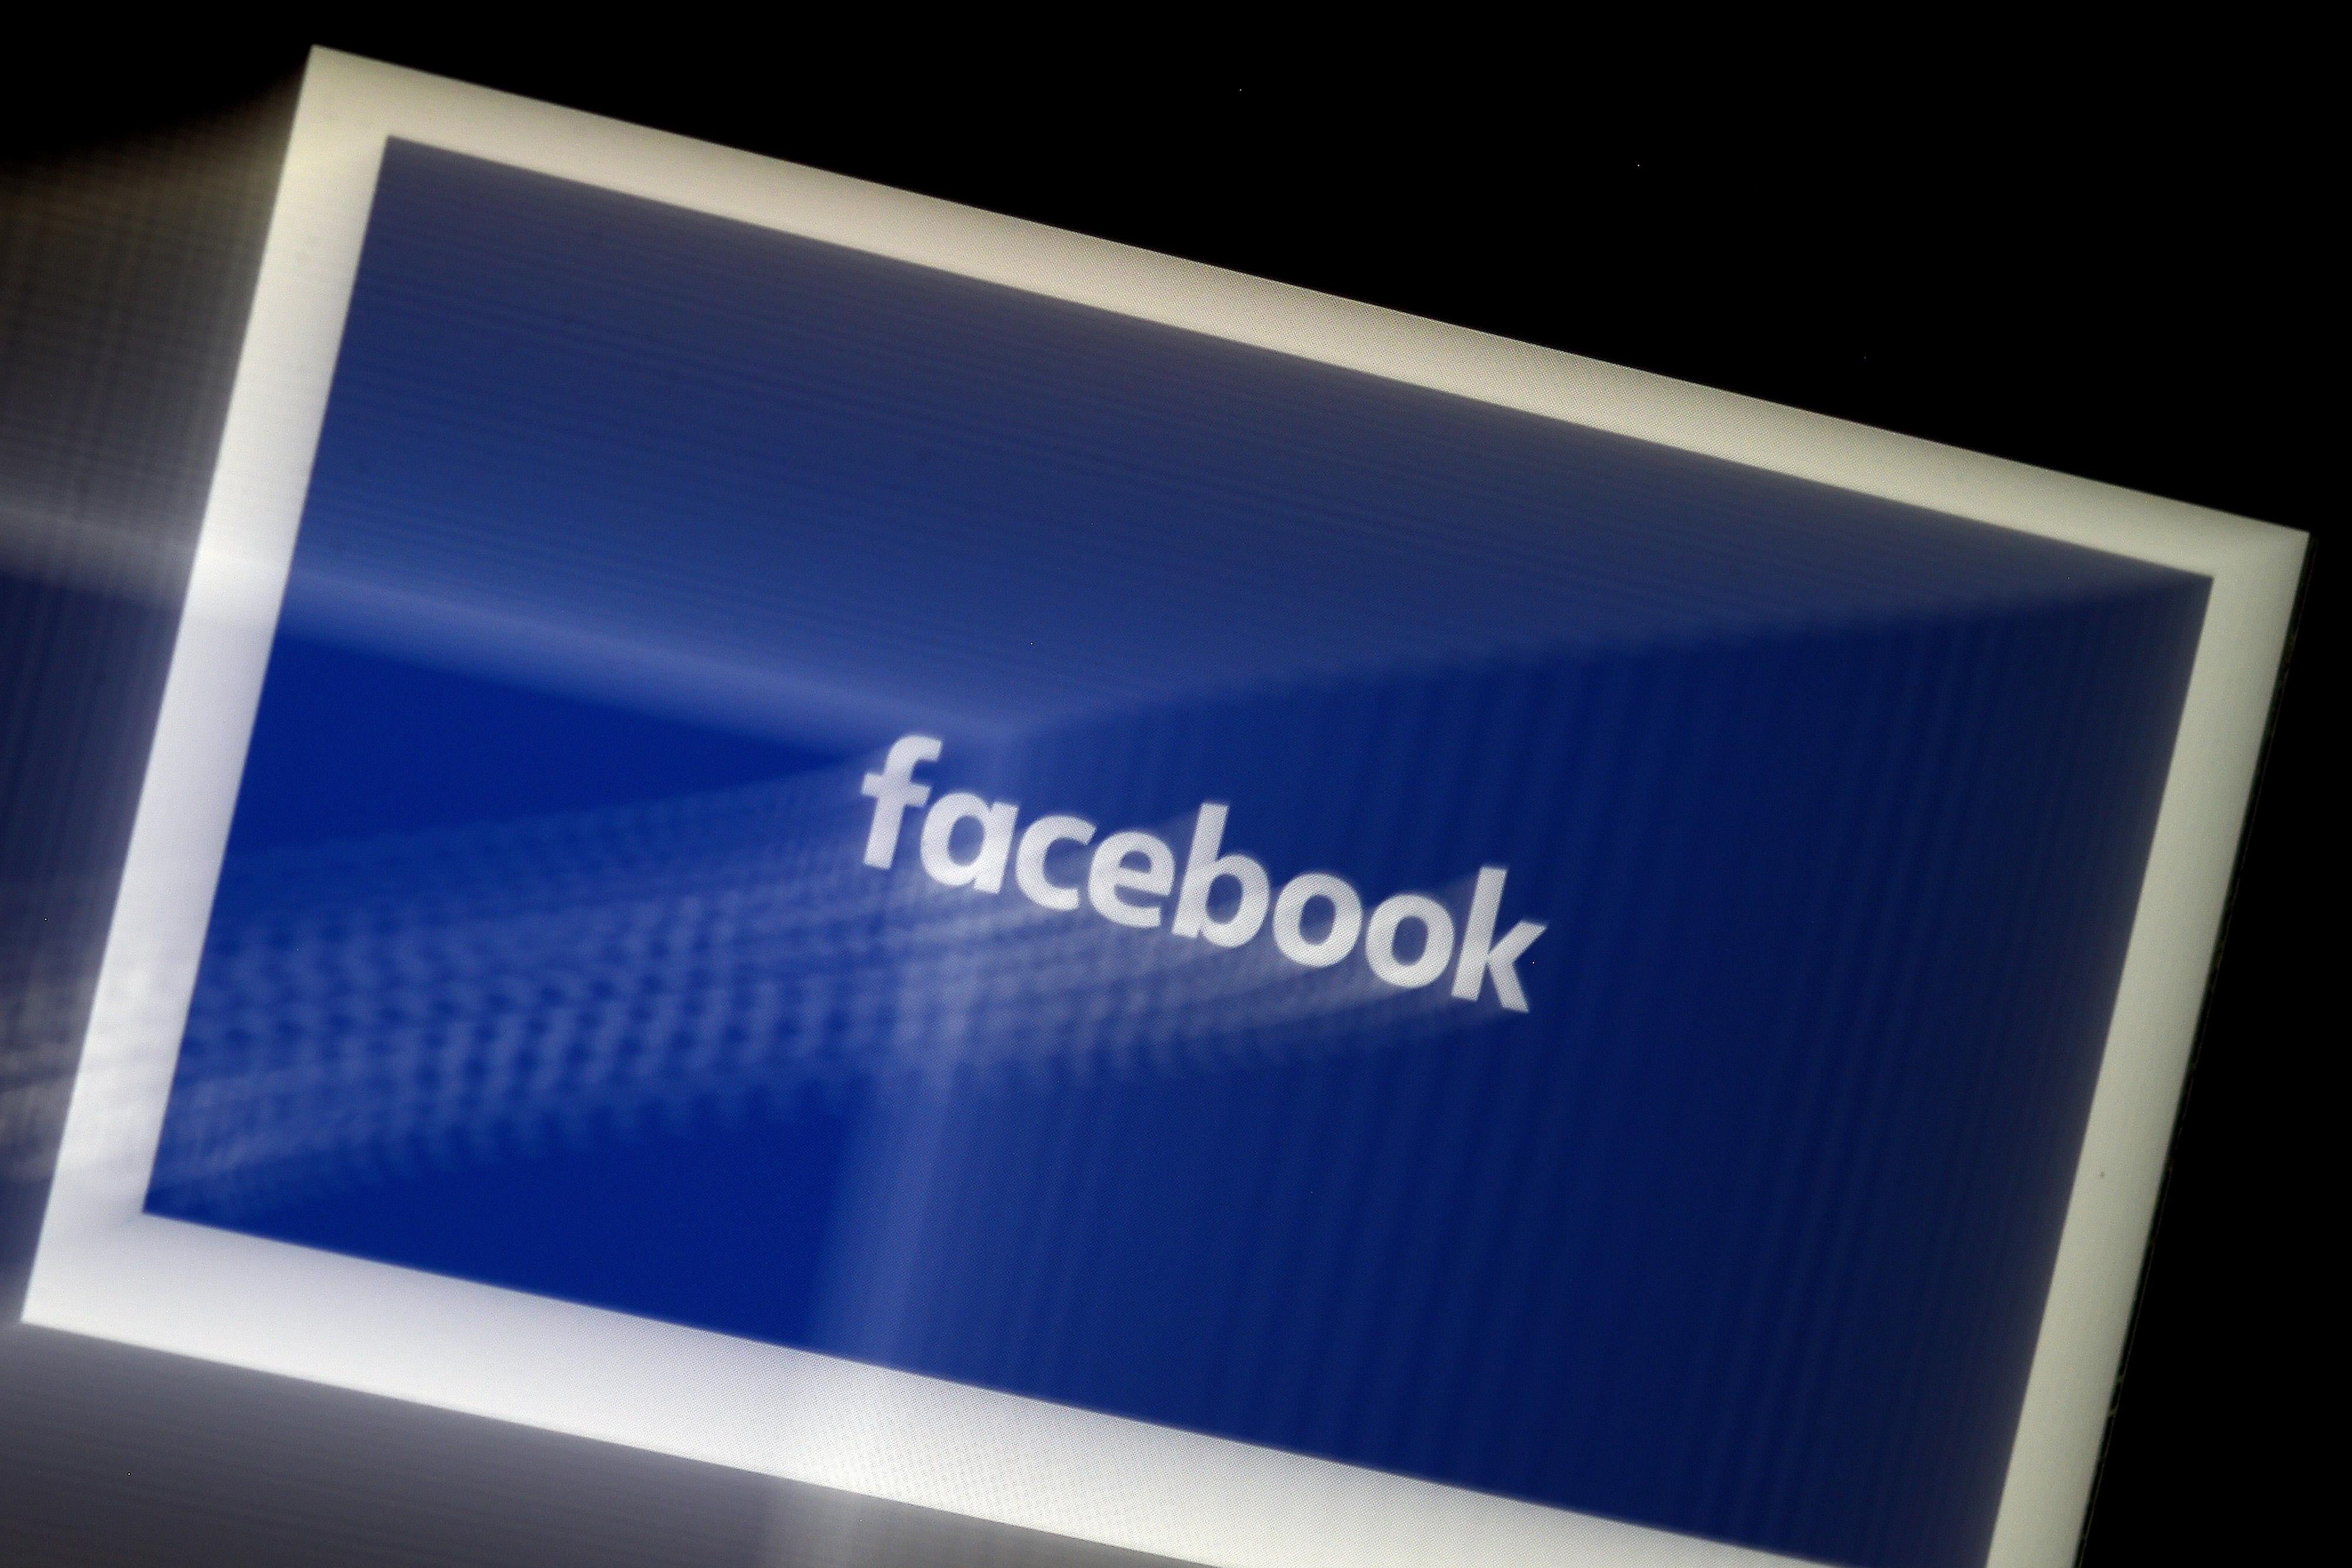 A blurred image of the Facebook logo on a tablet